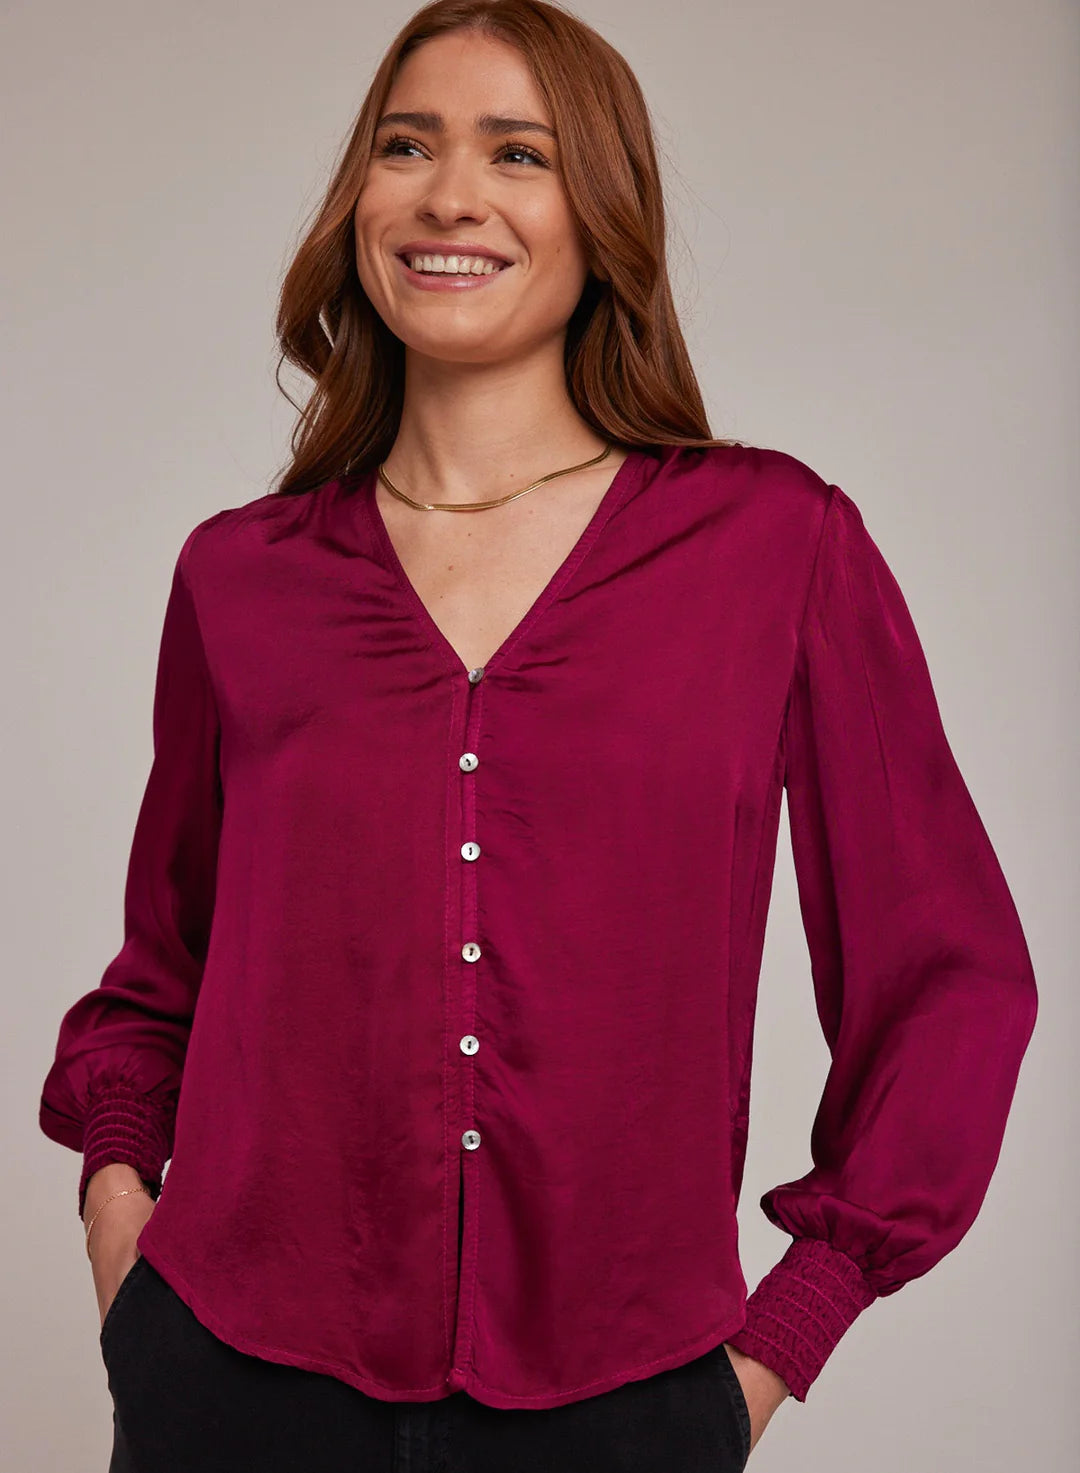 Say hello to your new favorite button down in these beautiful willow green and dark fuchsia tones. These are perfect summer to fall transitional colors and no doubt it will become a favorite in your wardrobe! Wear it to work with slacks and heels or dress it down with jeans and flats. Made with 100% Viscose.